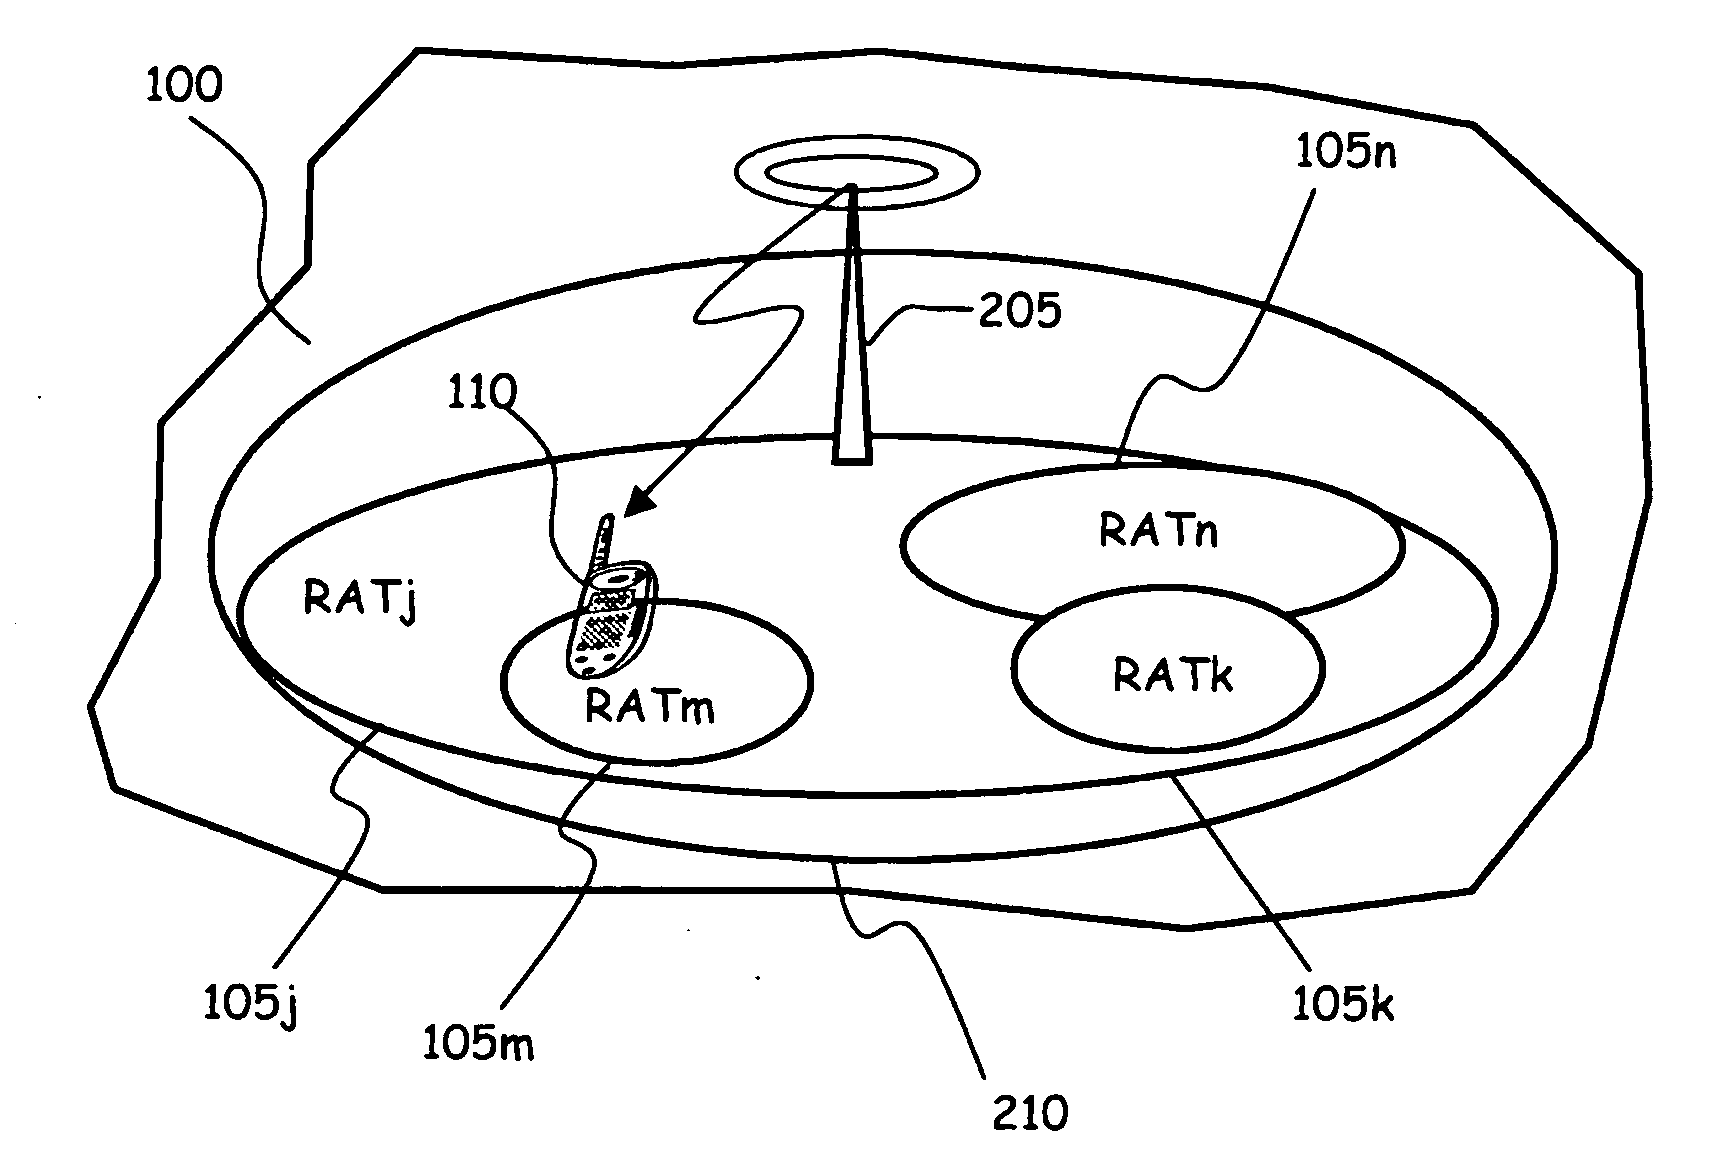 Method and system for enabling connection of a mobile communication terminal to a radio communication network